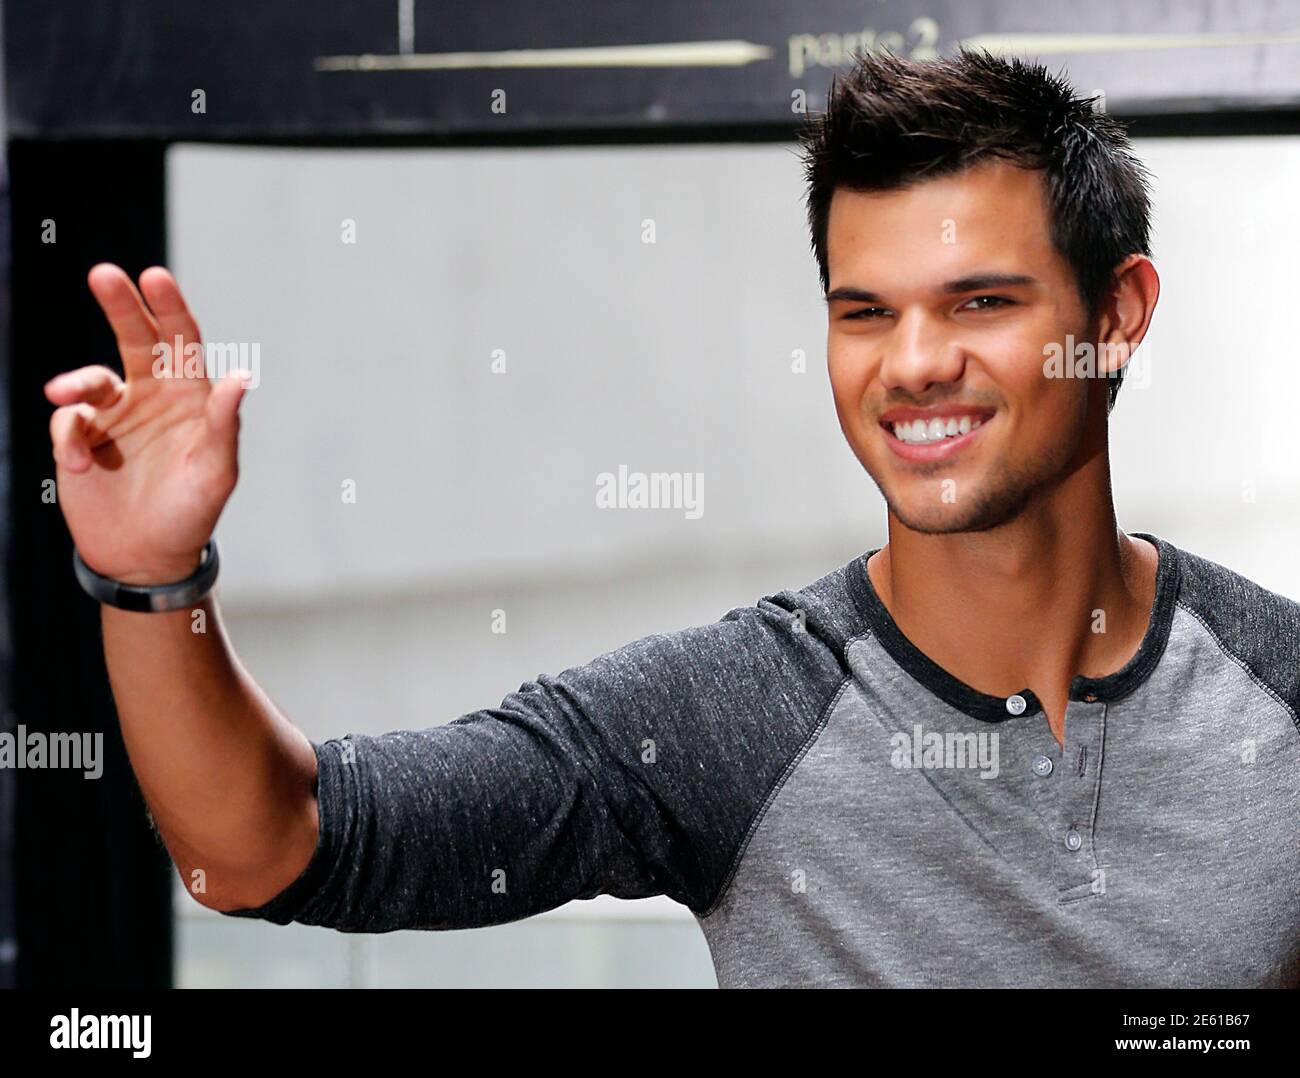 U.S. actor Taylor Lautner leaves a photocall of the film 'A saga crepusculo: Amanhecer' (The Twilight Saga - Breaking Dawn) in Rio de Janeiro October 24, 2012. REUTERS/Sergio Moraes (BRAZIL - Tags: ENTERTAINMENT) Stock Photo